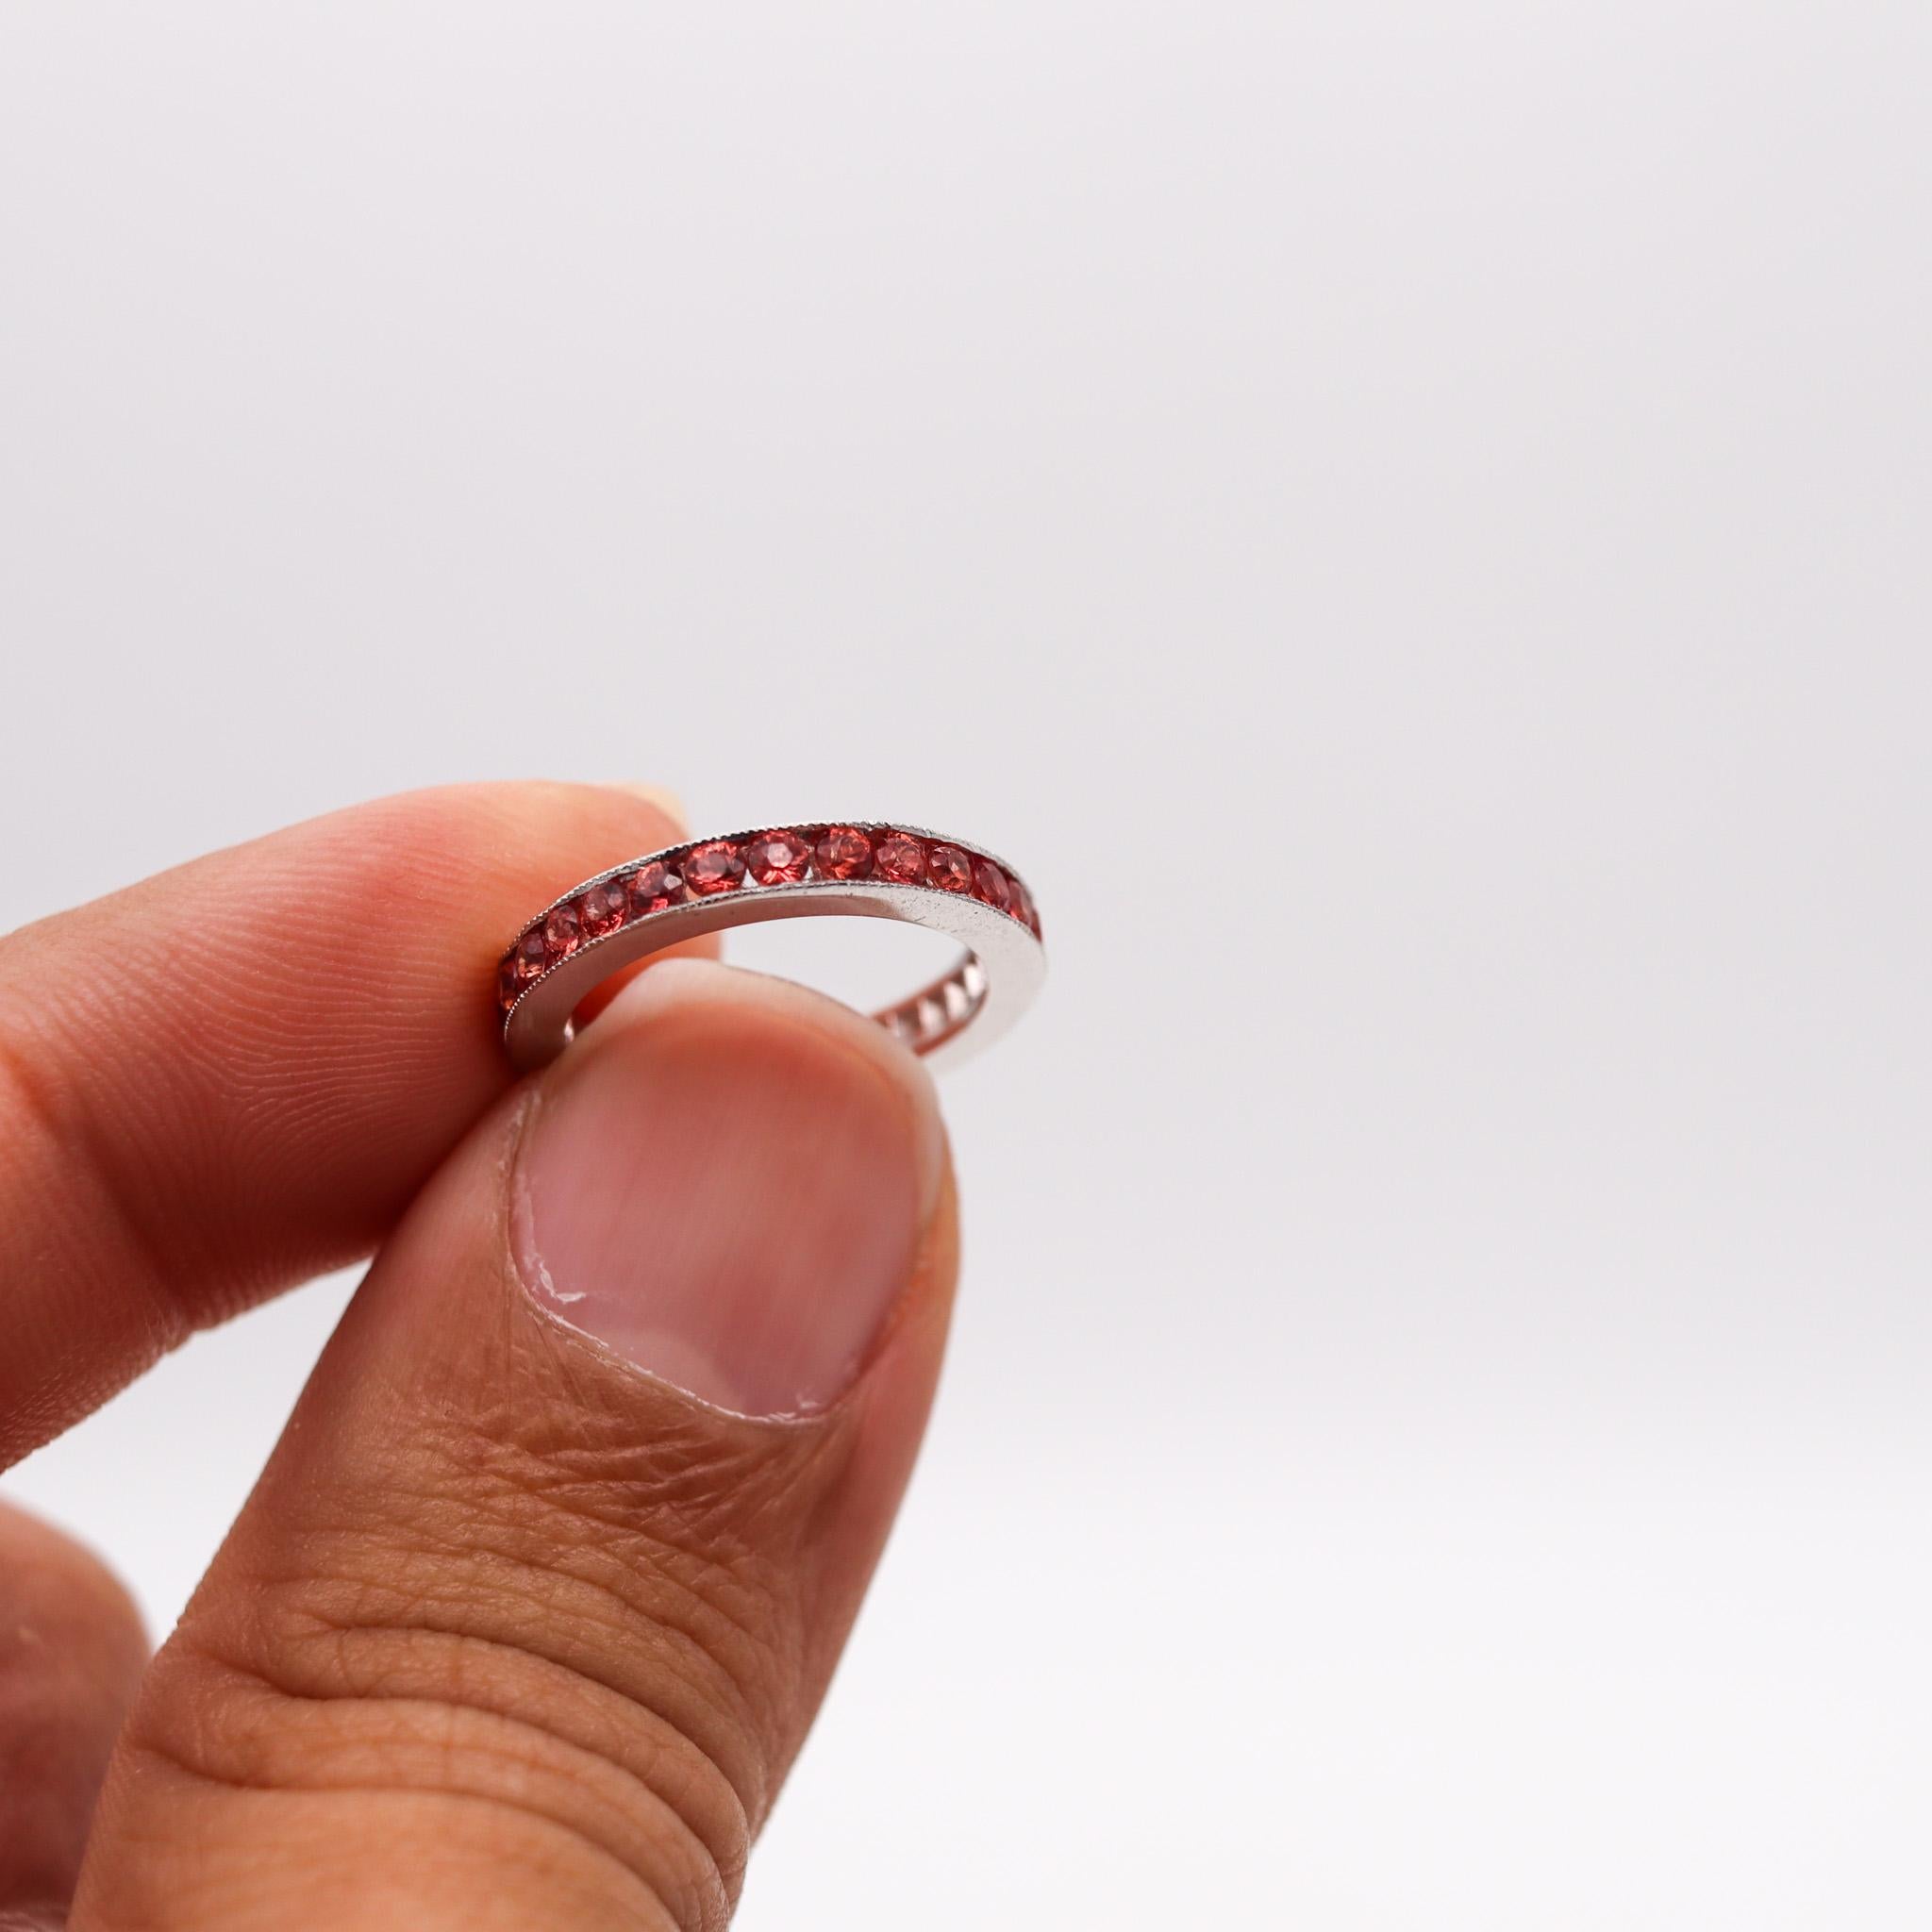 Italian Eternity Ring Band In 18 Kt White Gold With 1.68 Ctw In Reddish Sapphire In Excellent Condition For Sale In Miami, FL